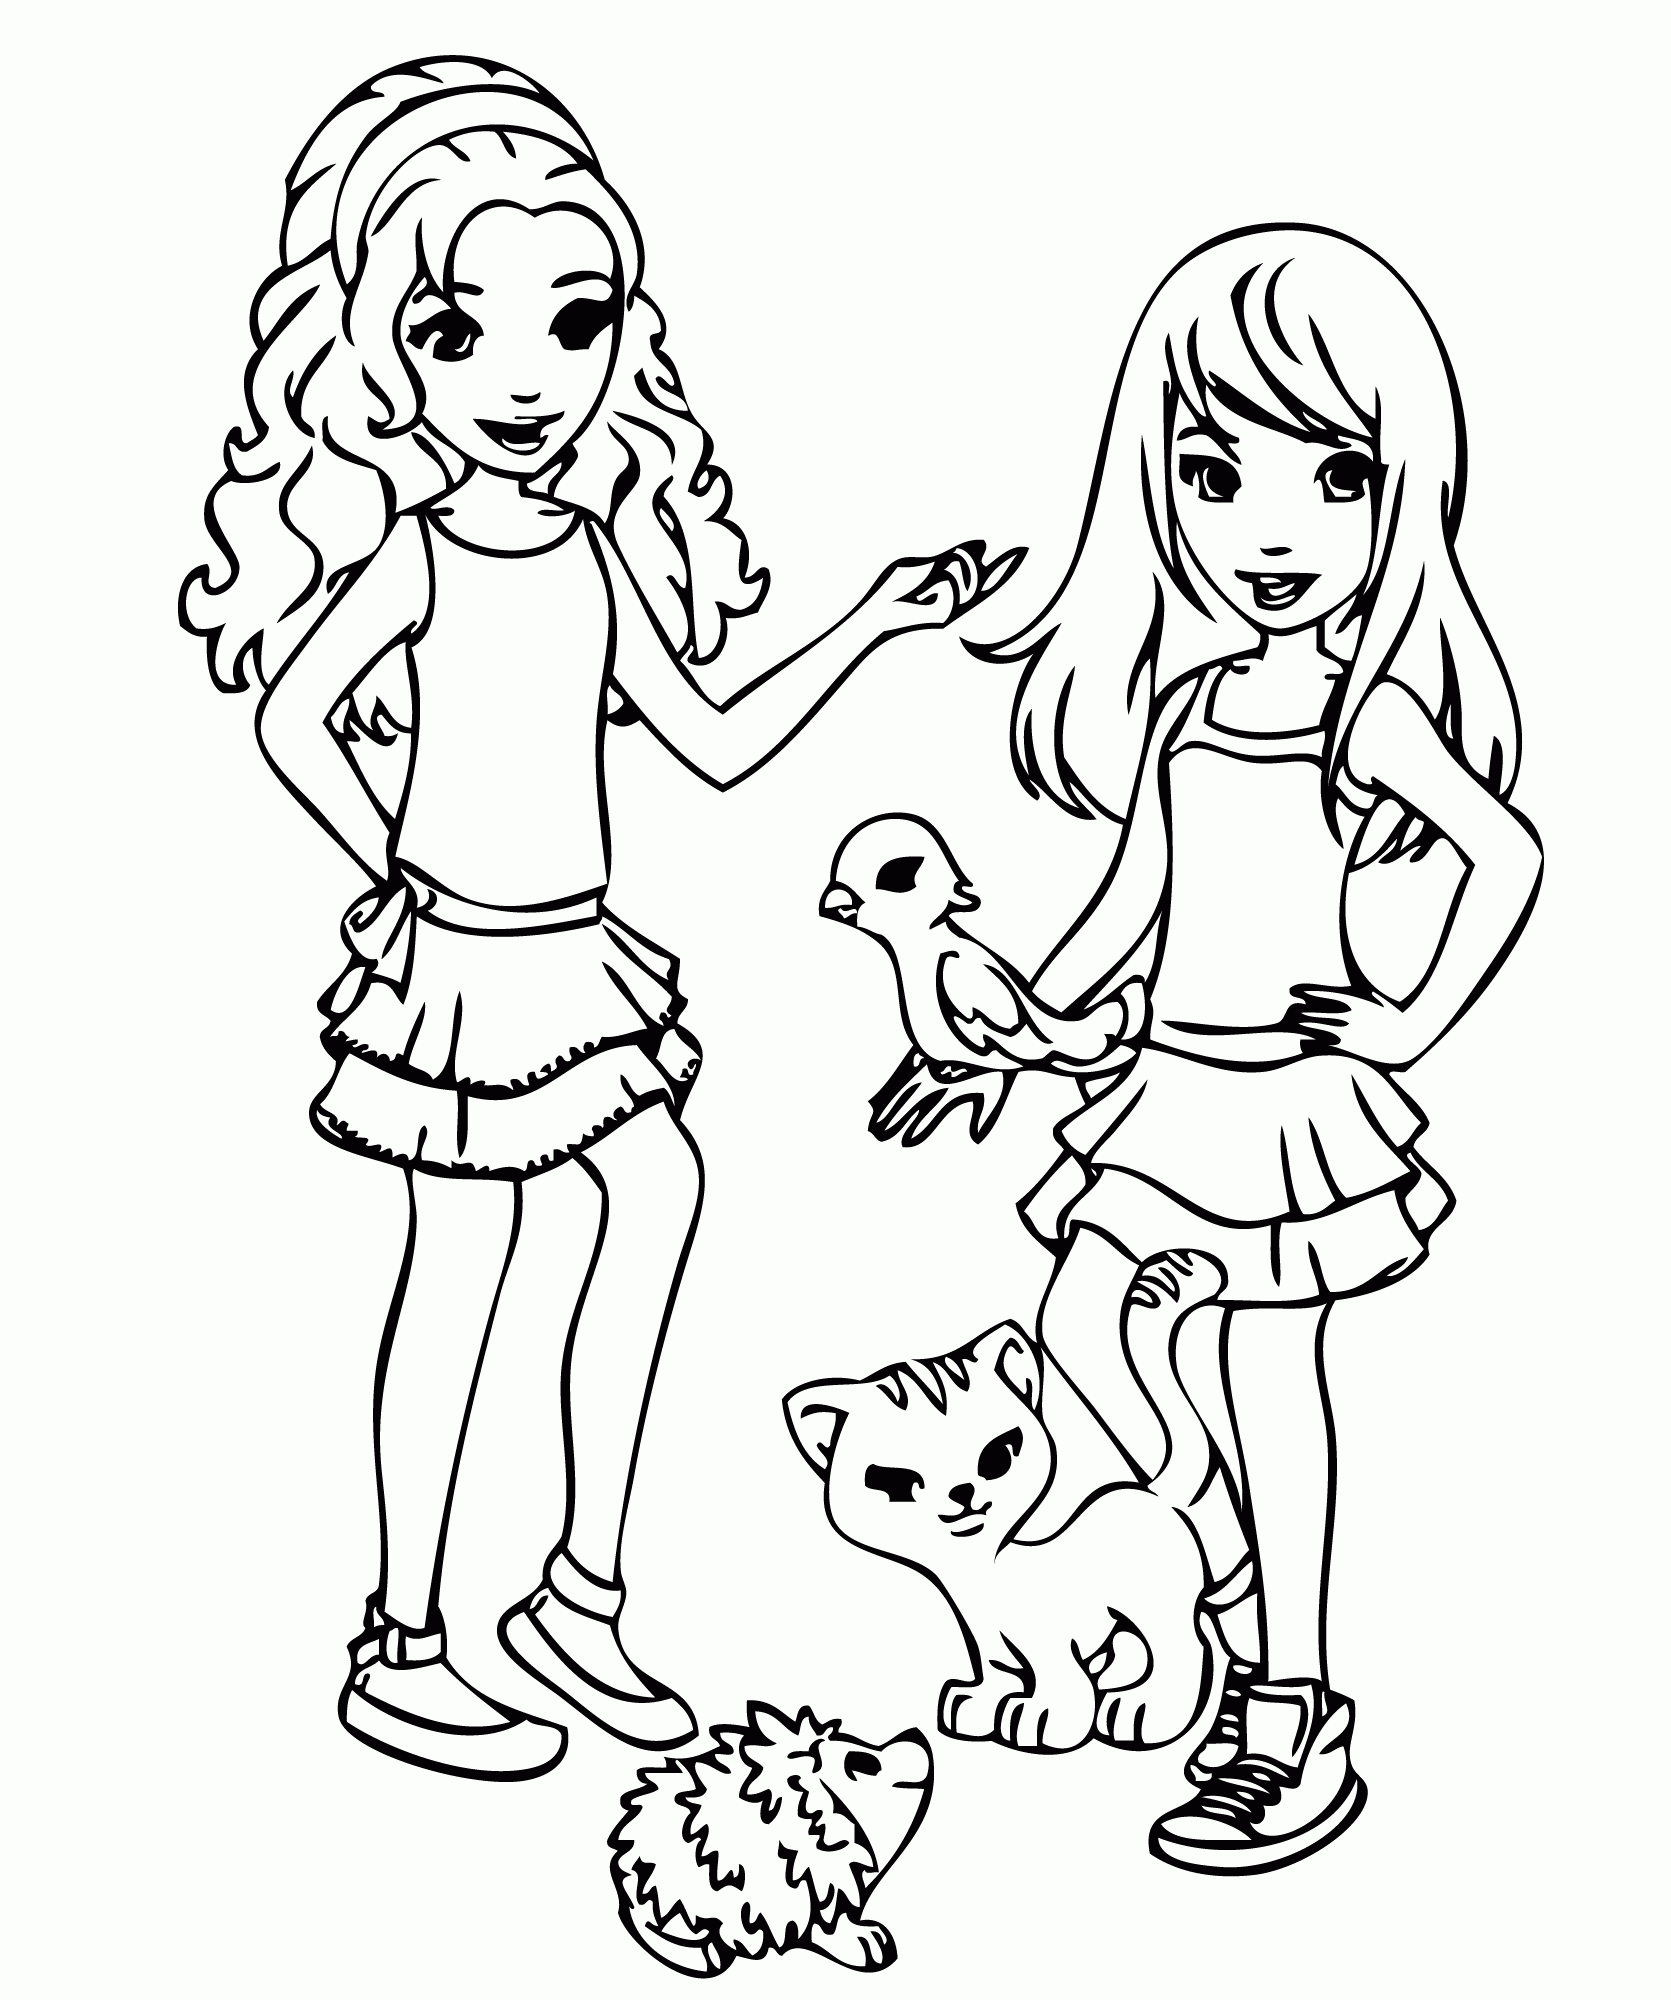 Lego Friends Coloring Pages Mia | High Quality Coloring Pages